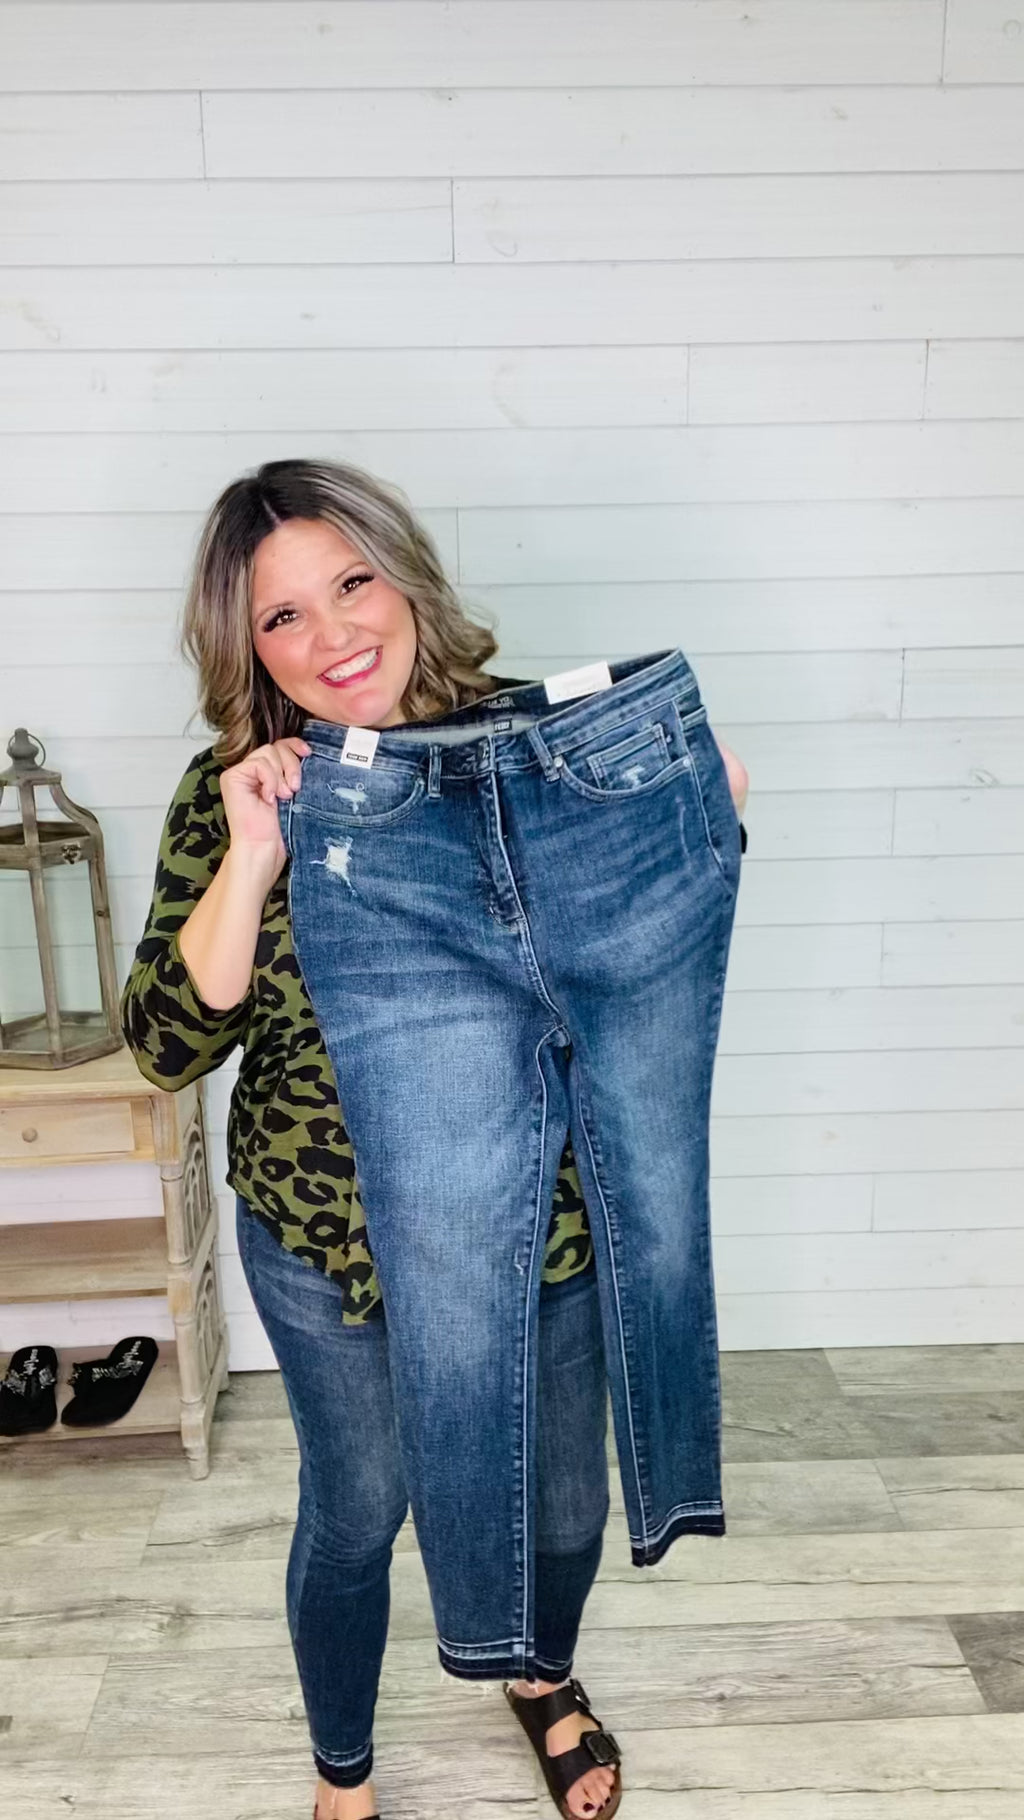 Reviewing Judy Blue jeans on a size 14/16 with an apron belly! ✨ Thx @, judy blue jeans